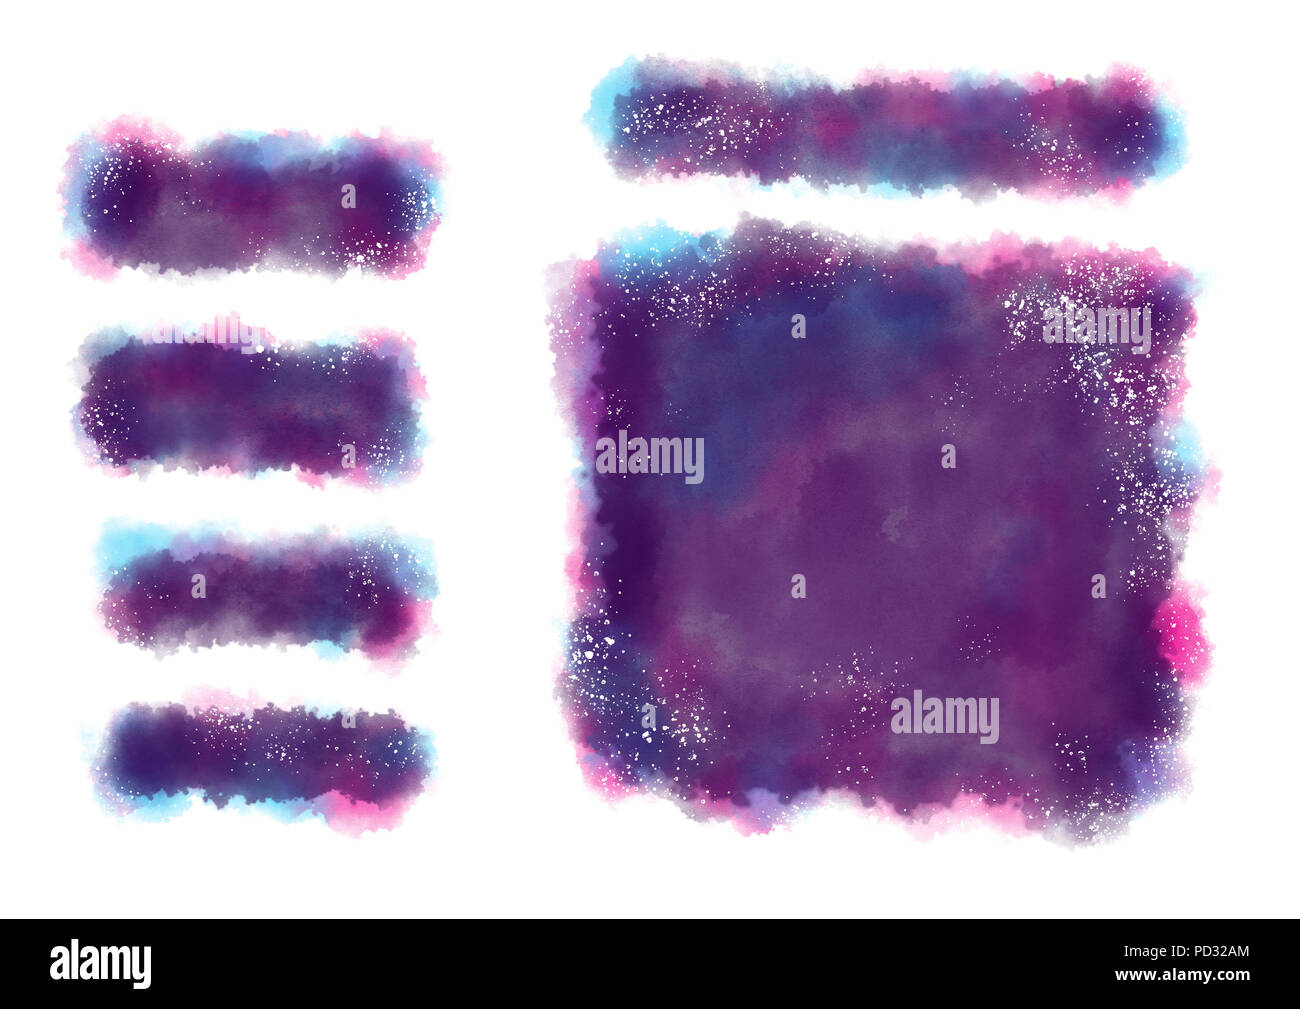 A digital watercolor set of background, with white dots and buttons in red, purple, ultra violet, burgundy, blue color isolated on a white background. Stock Photo